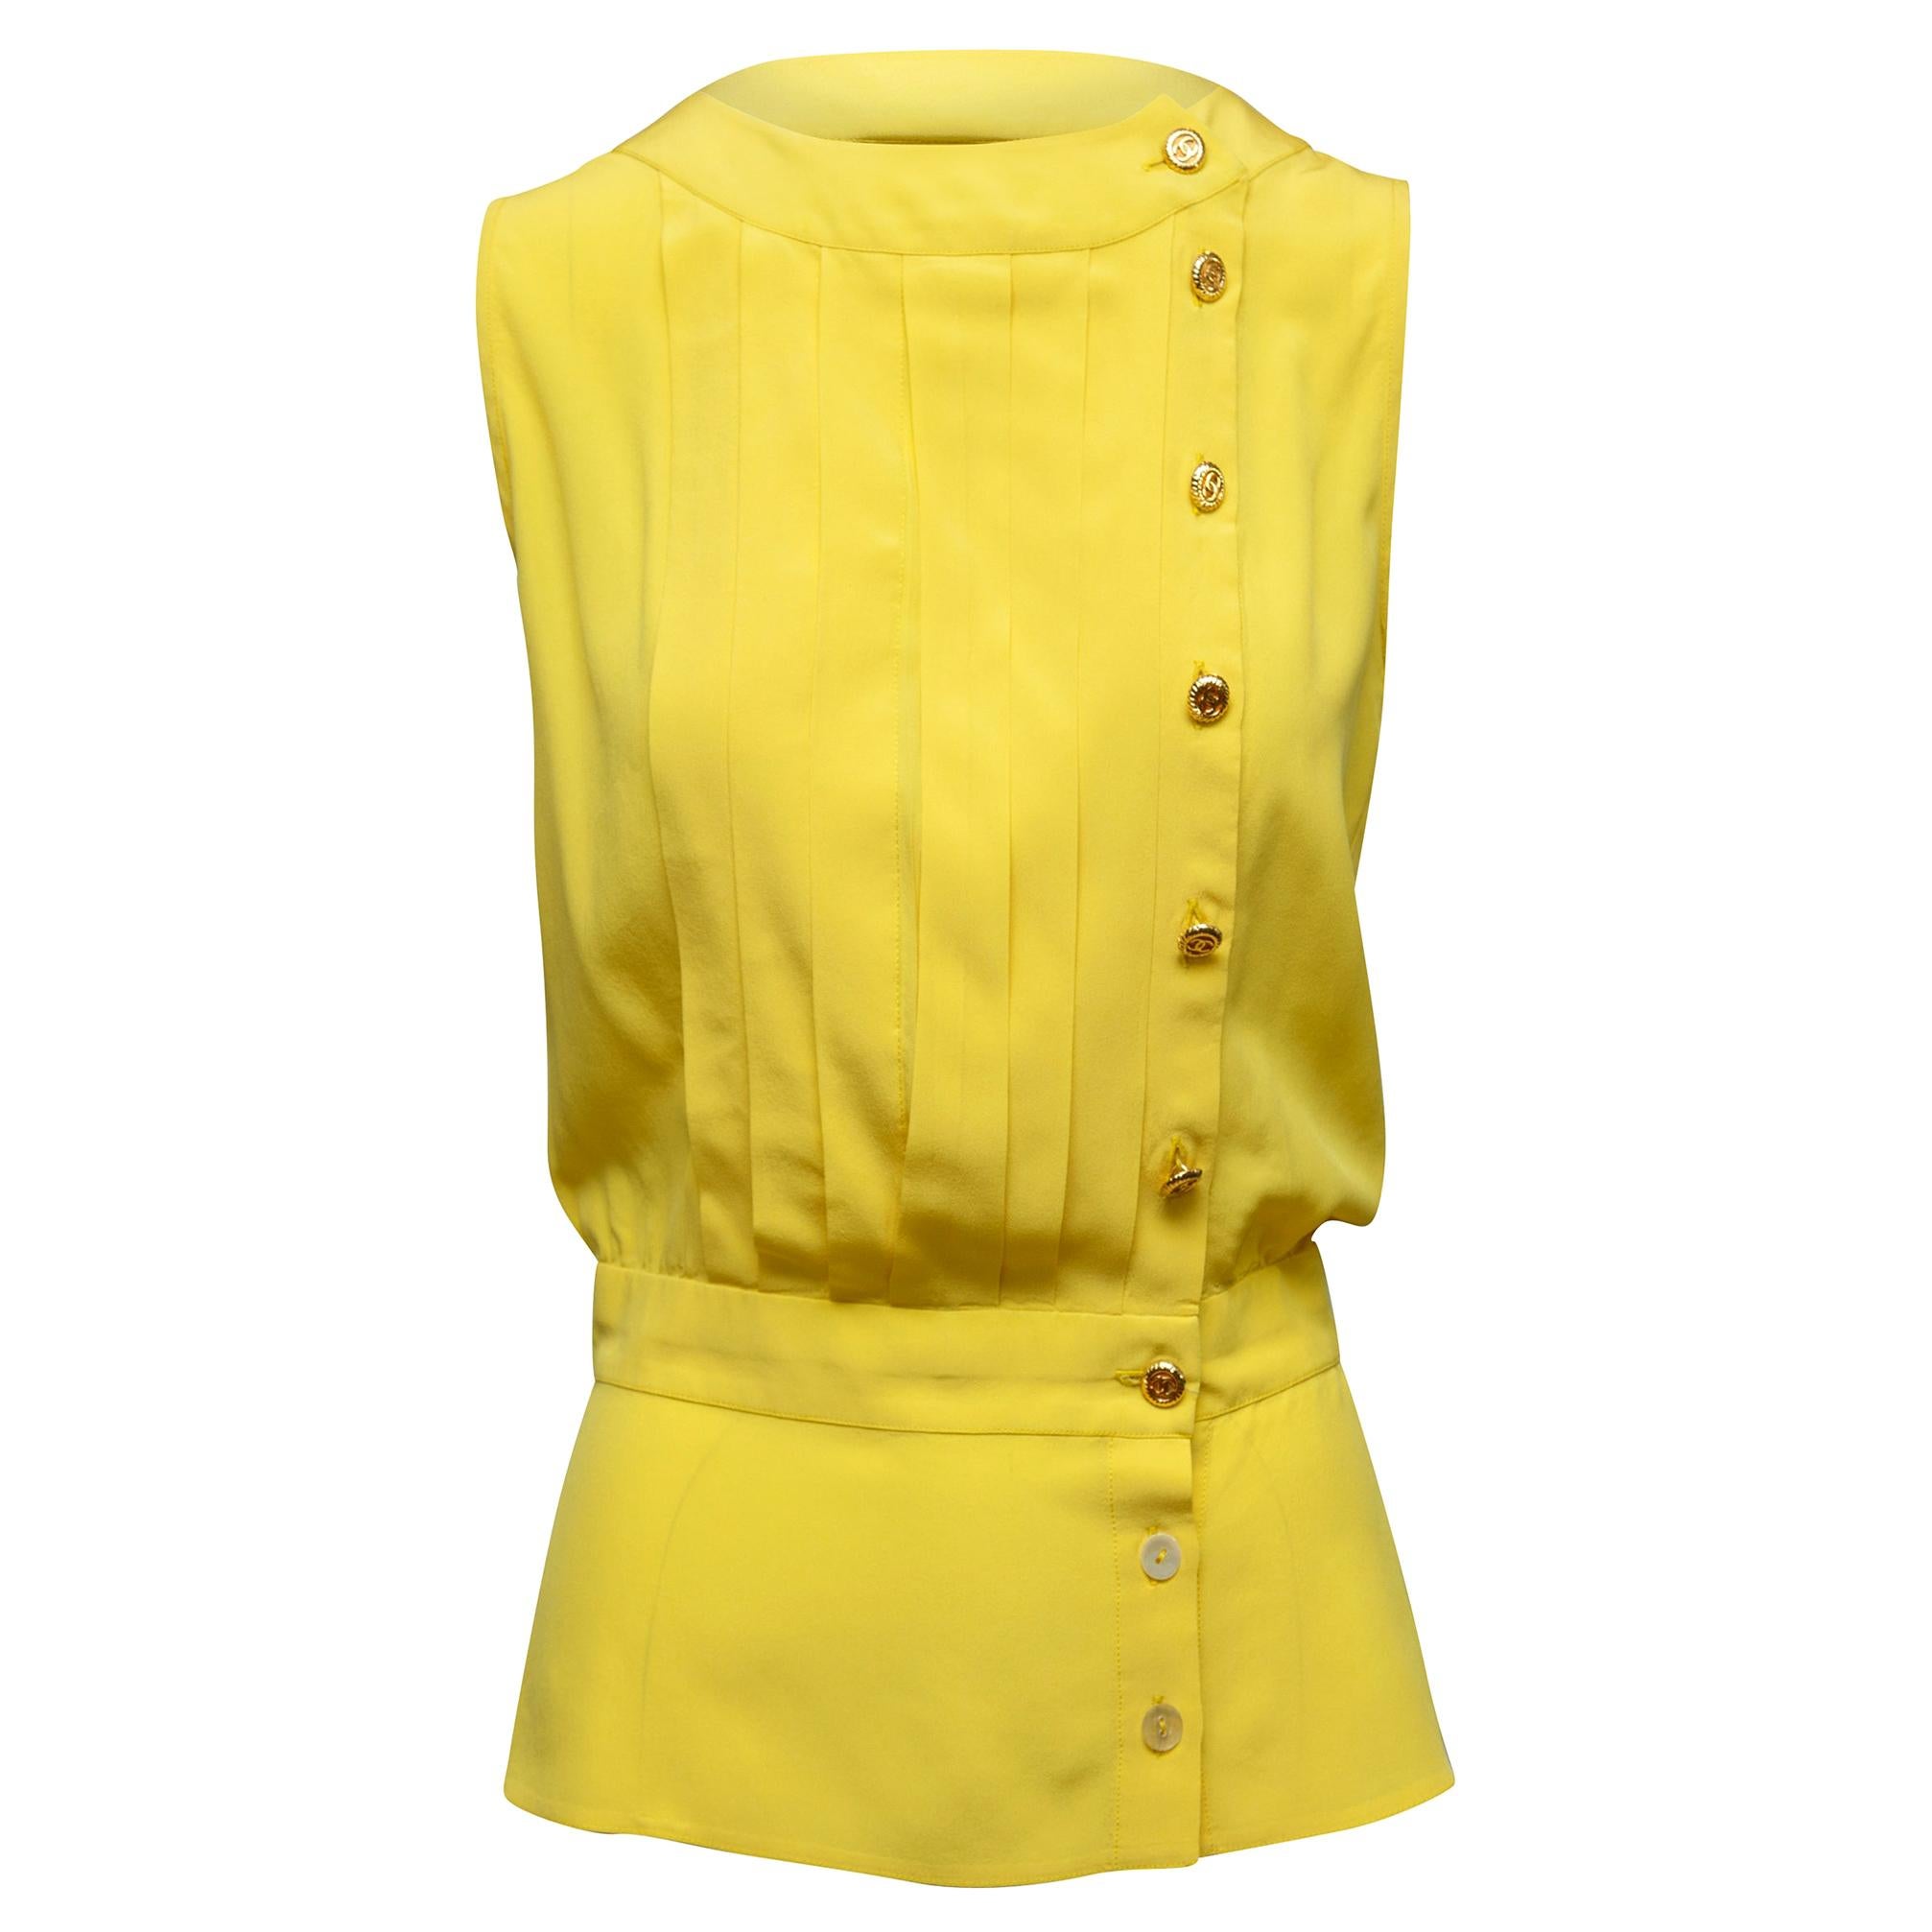 Chanel Boutique Yellow Sleeveless Top